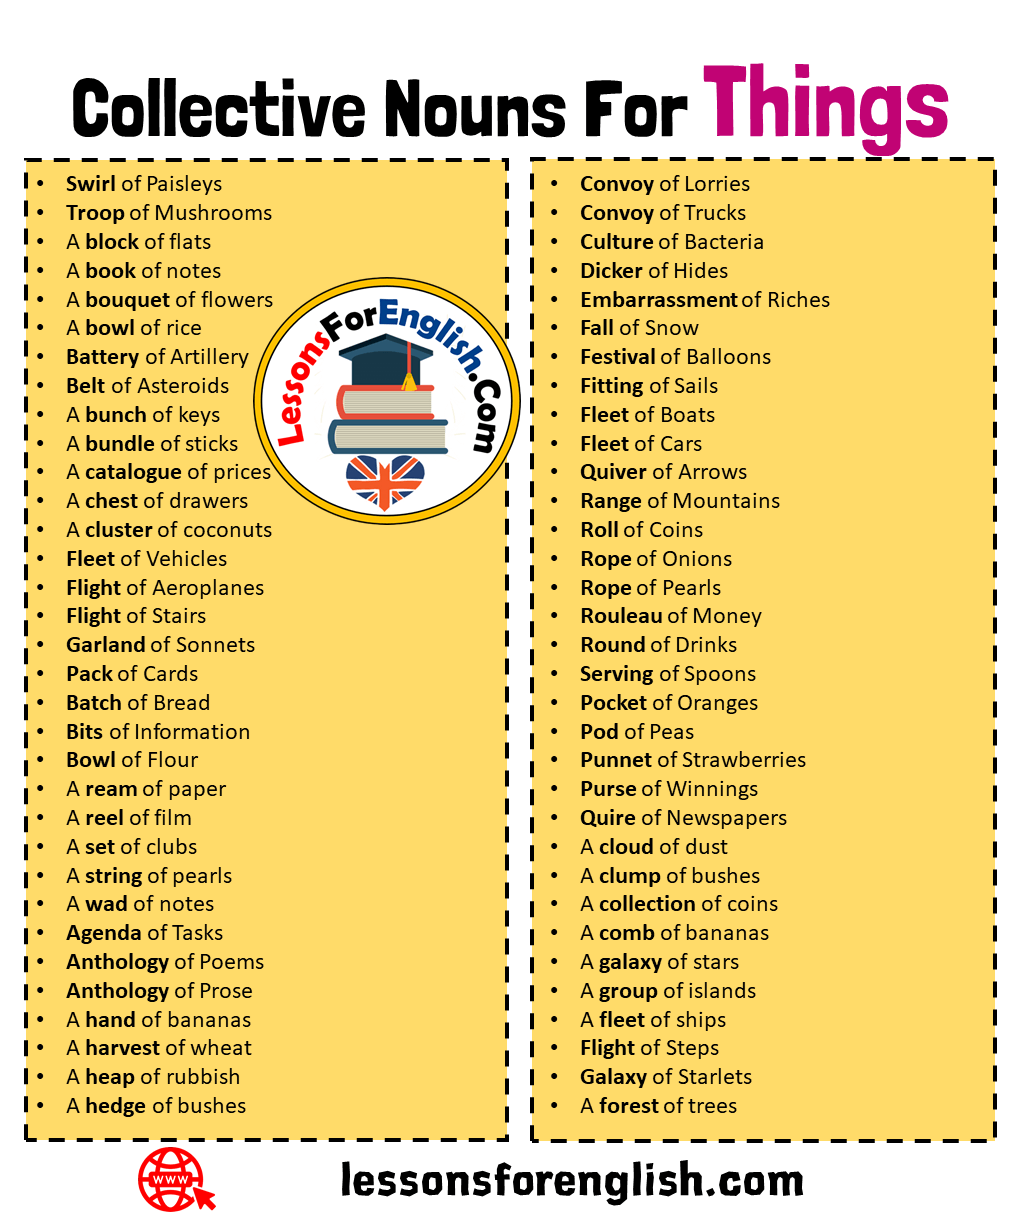 Collective Nouns For Things List in English